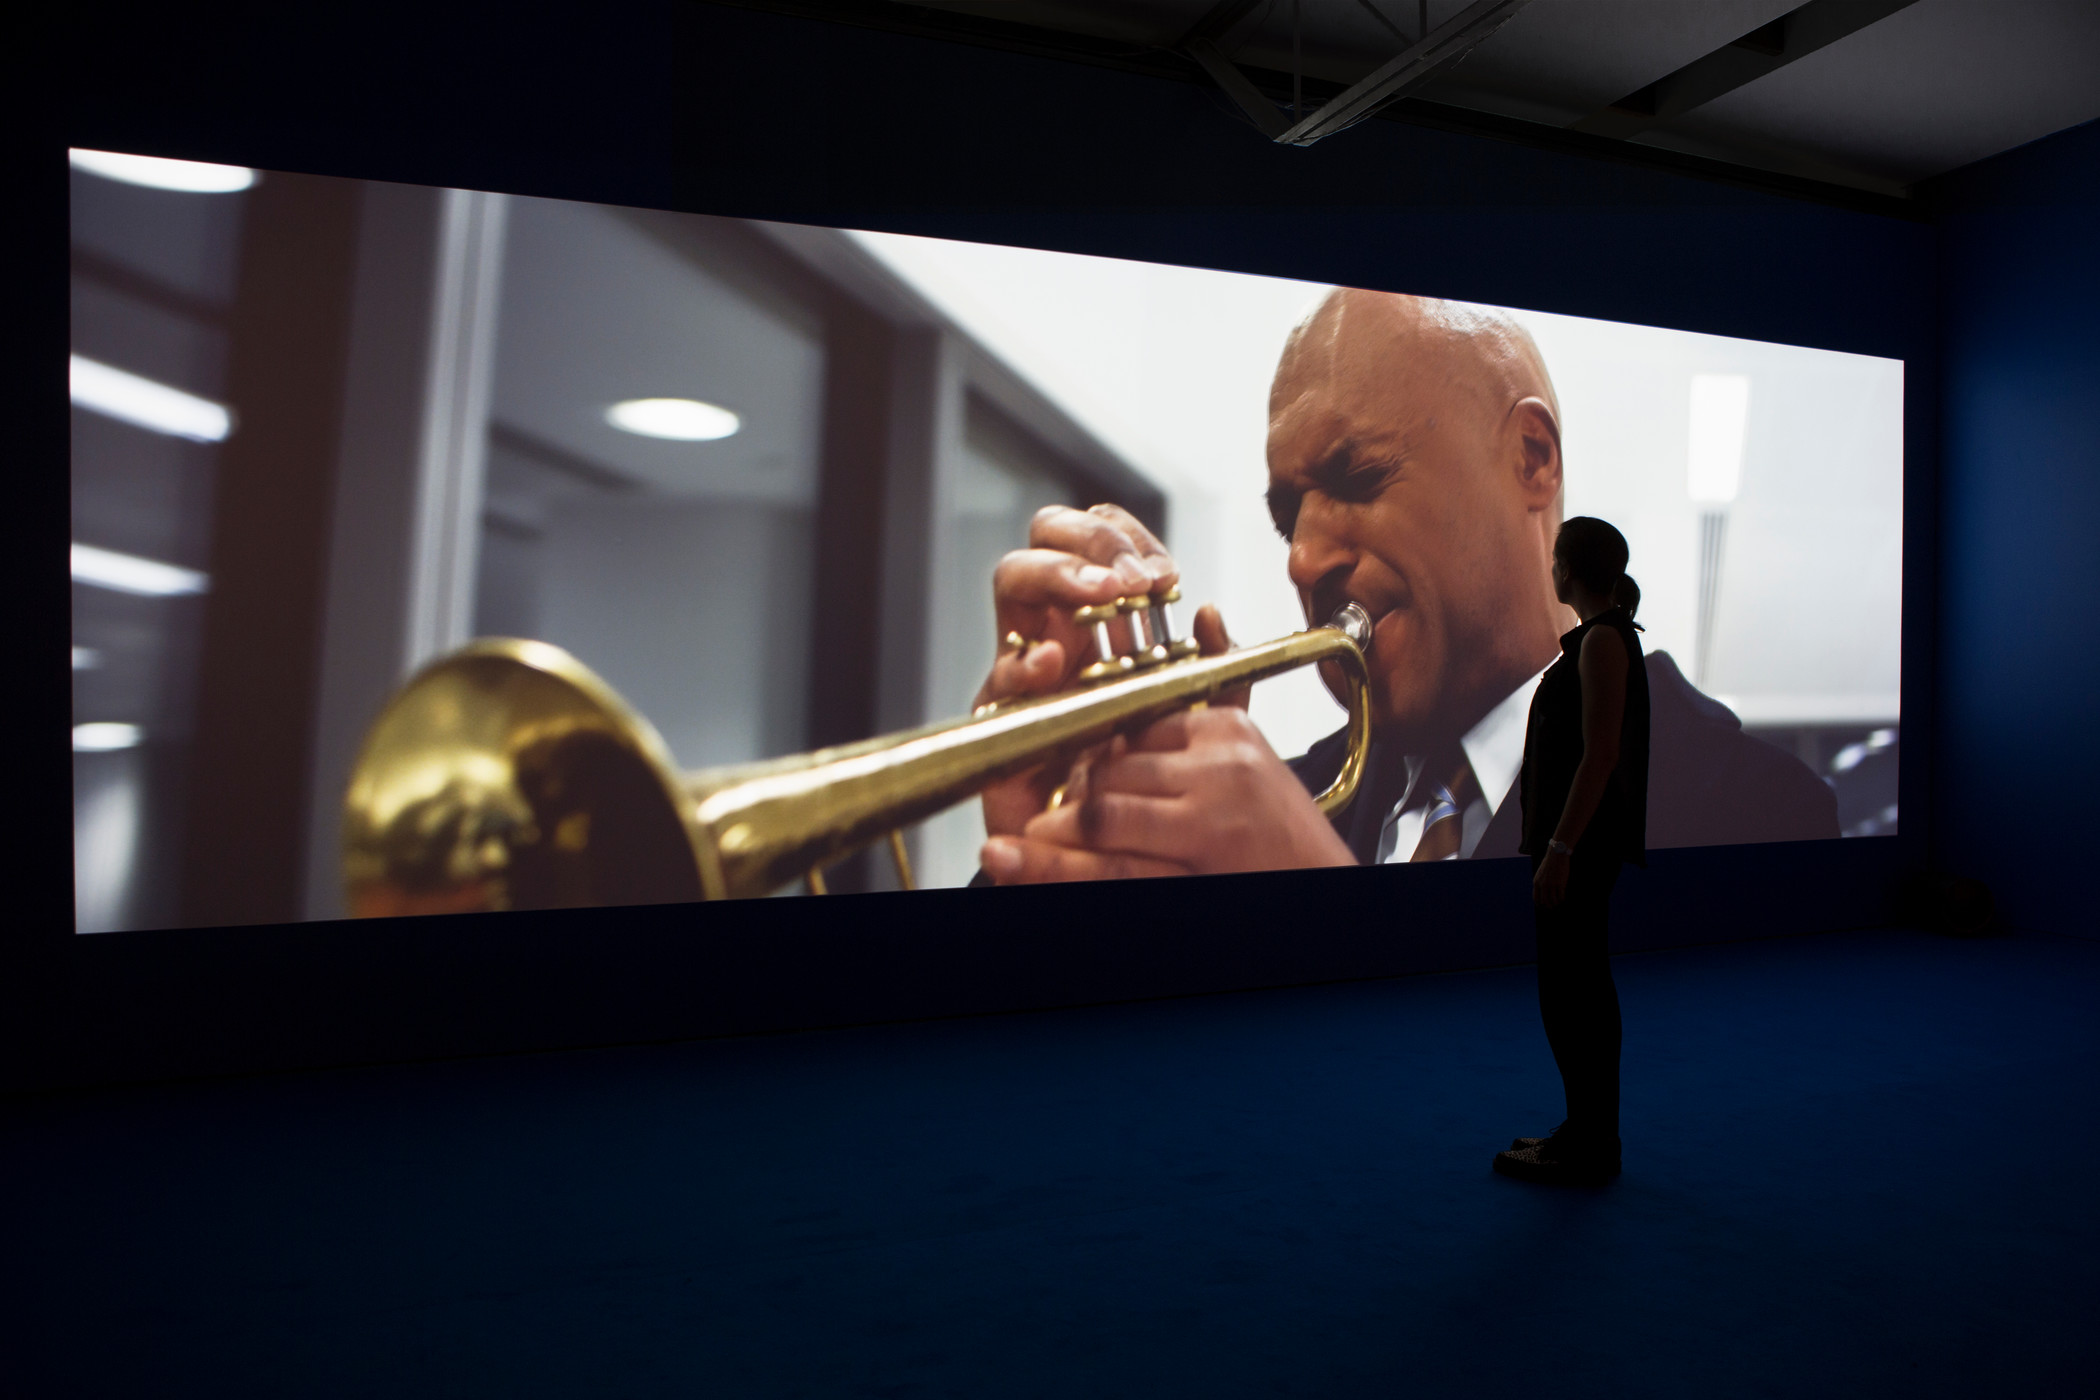  Isaac Julien, PLAYTIME, 2013, Los Angeles County Museum of Art, gift of Sheridan Brown, installation view, Roslyn Oxley9 Gallery, Sydney, 2013, © Isaac Julien, photo courtesy the artist